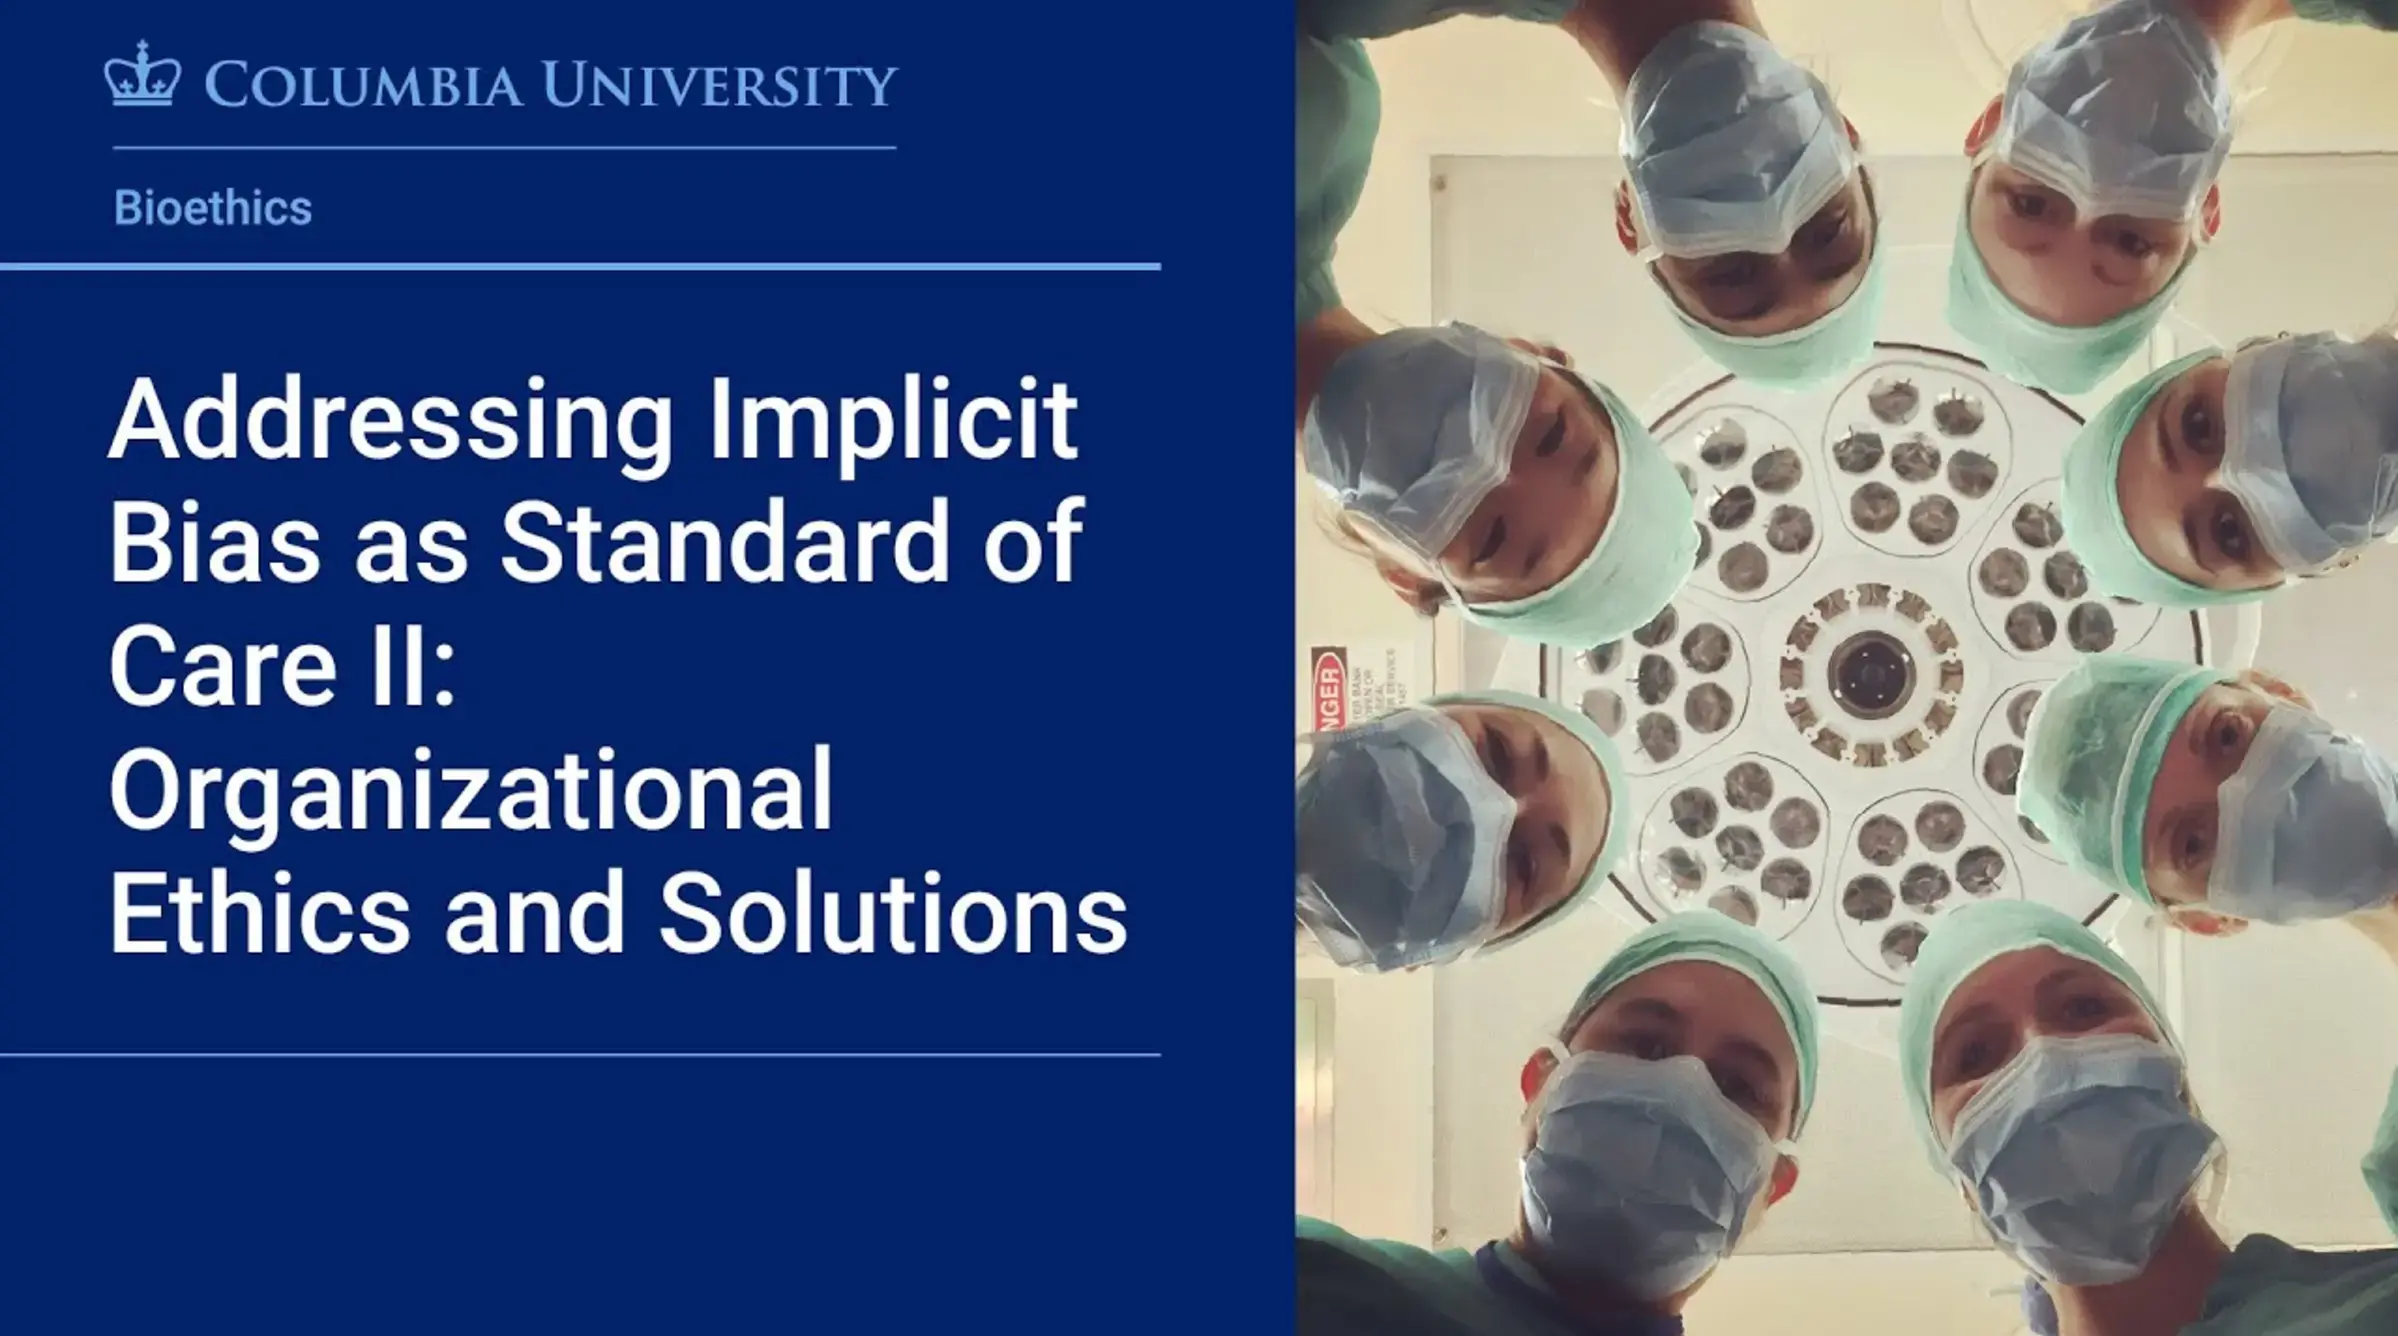 Addressing Implicit Bias as Standard of Care II: Organizational Ethics and Solutions